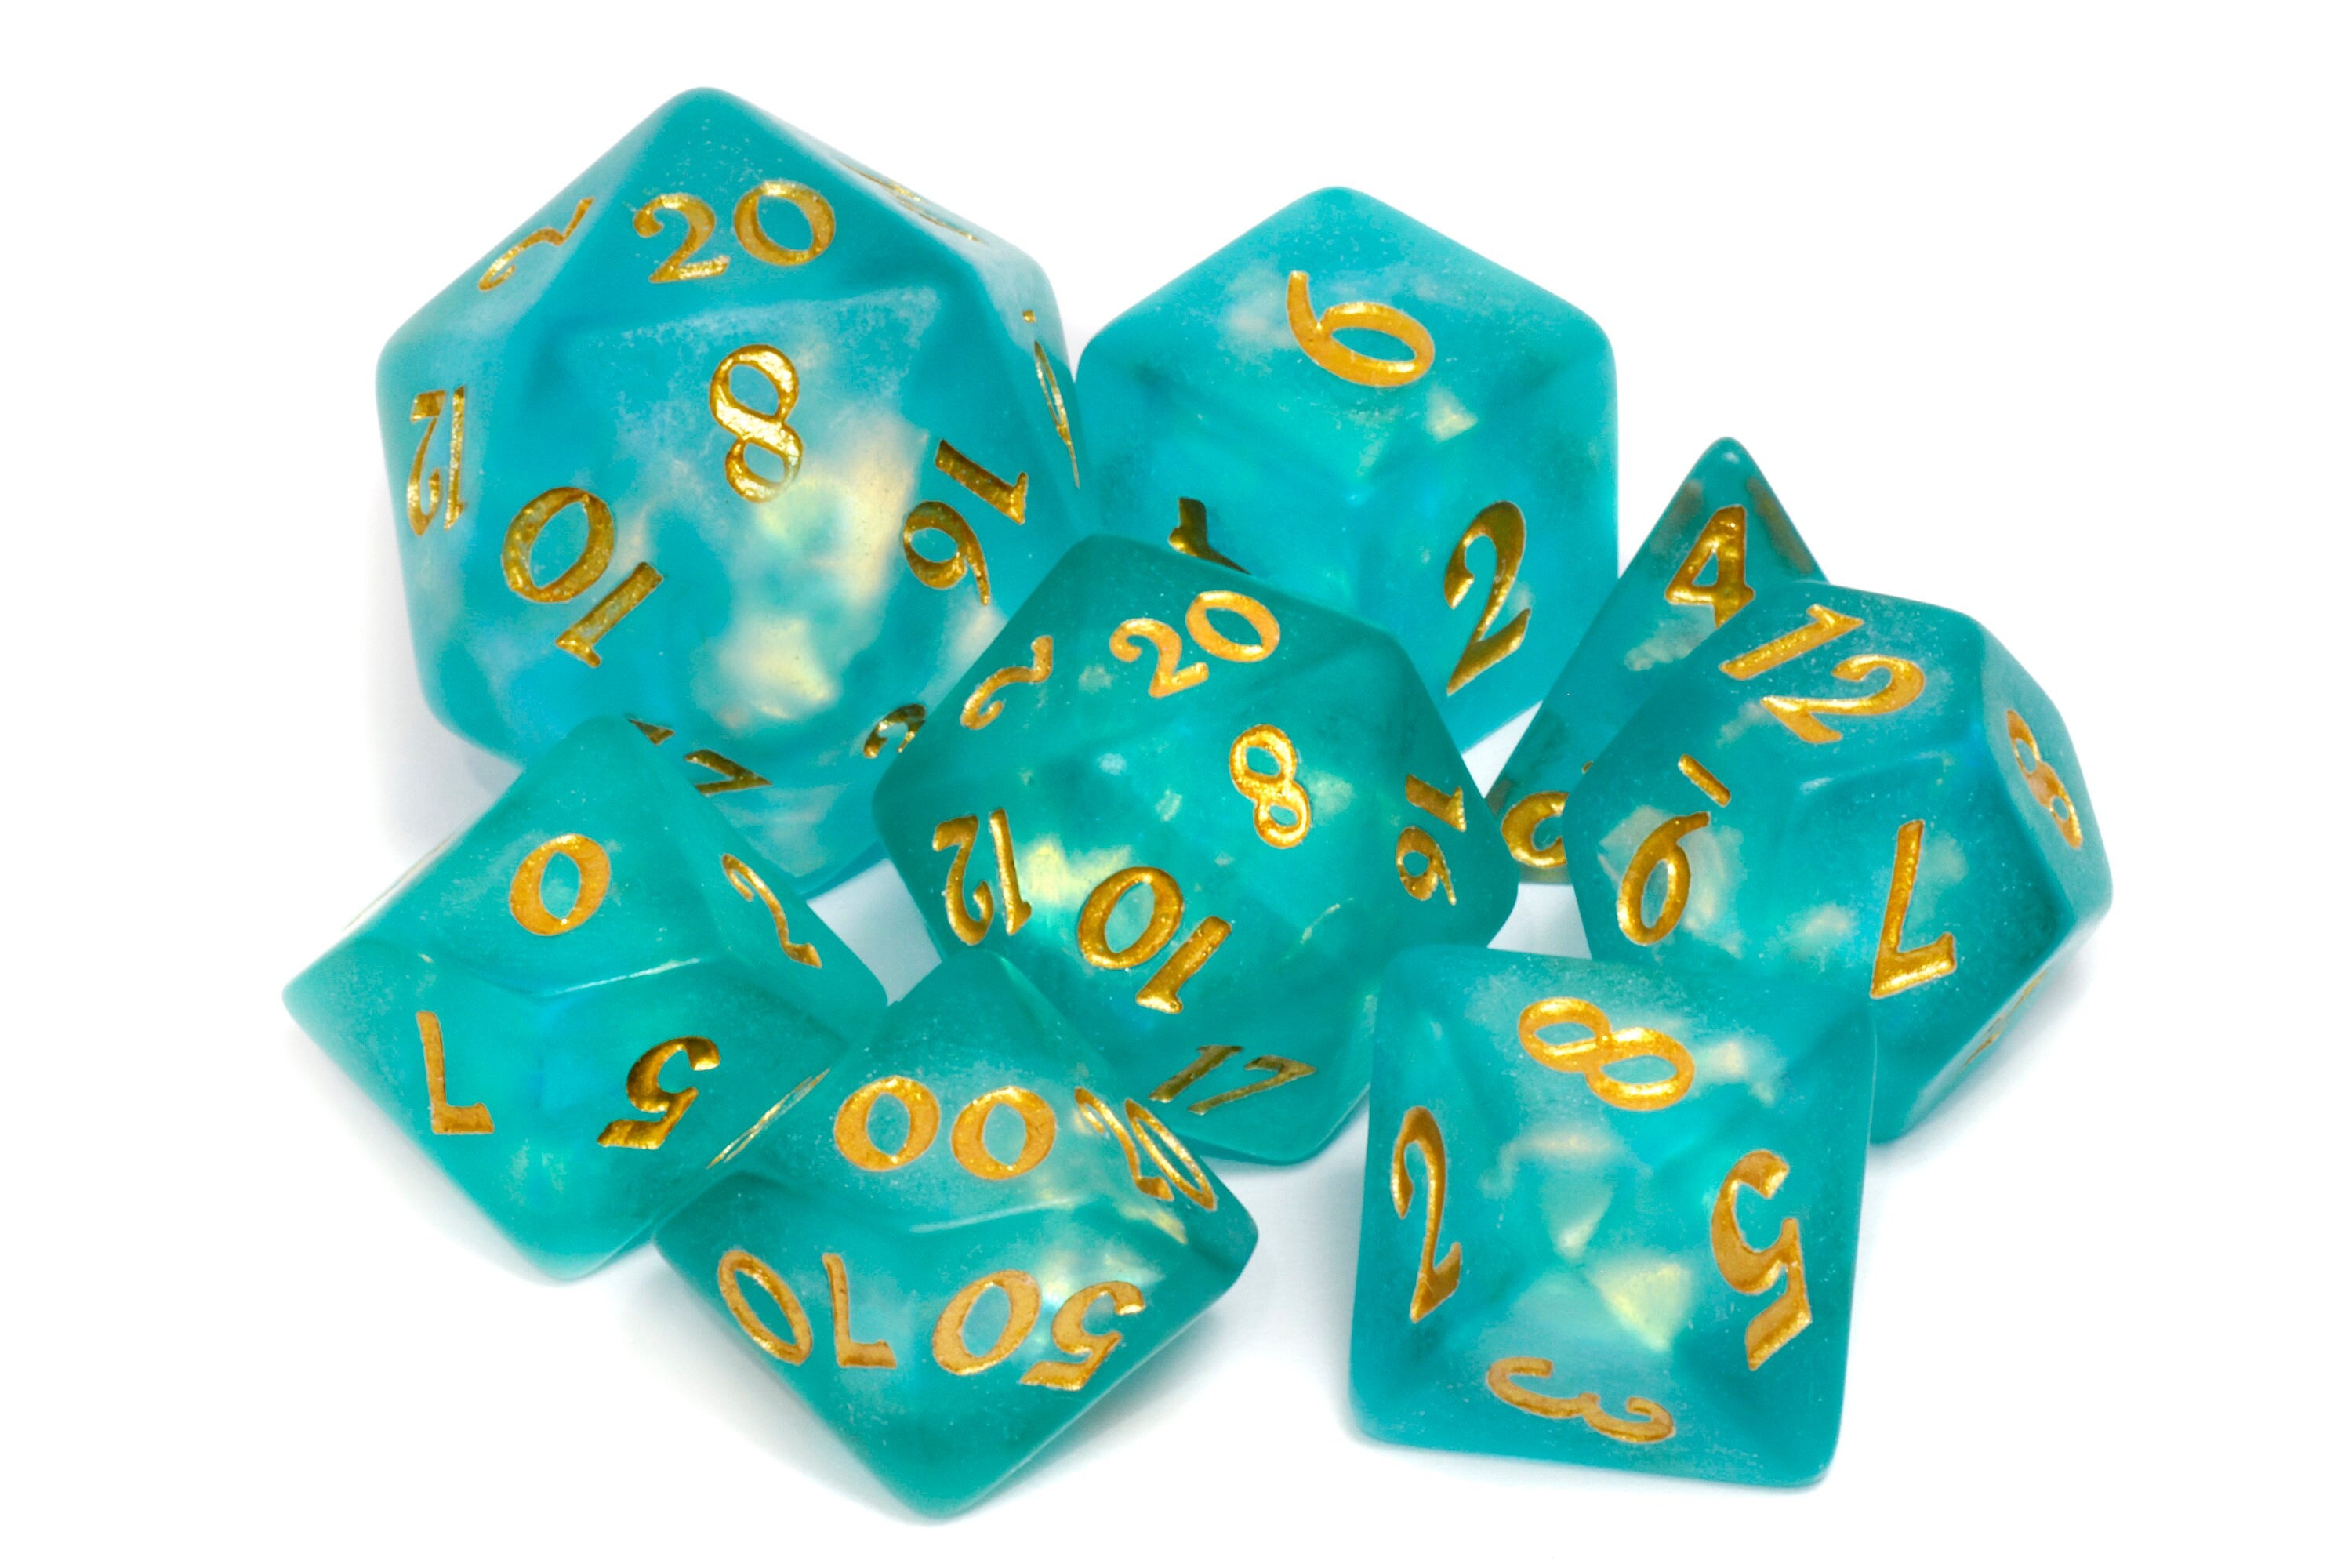 Celestial dice box and dice set Set, Turquoise